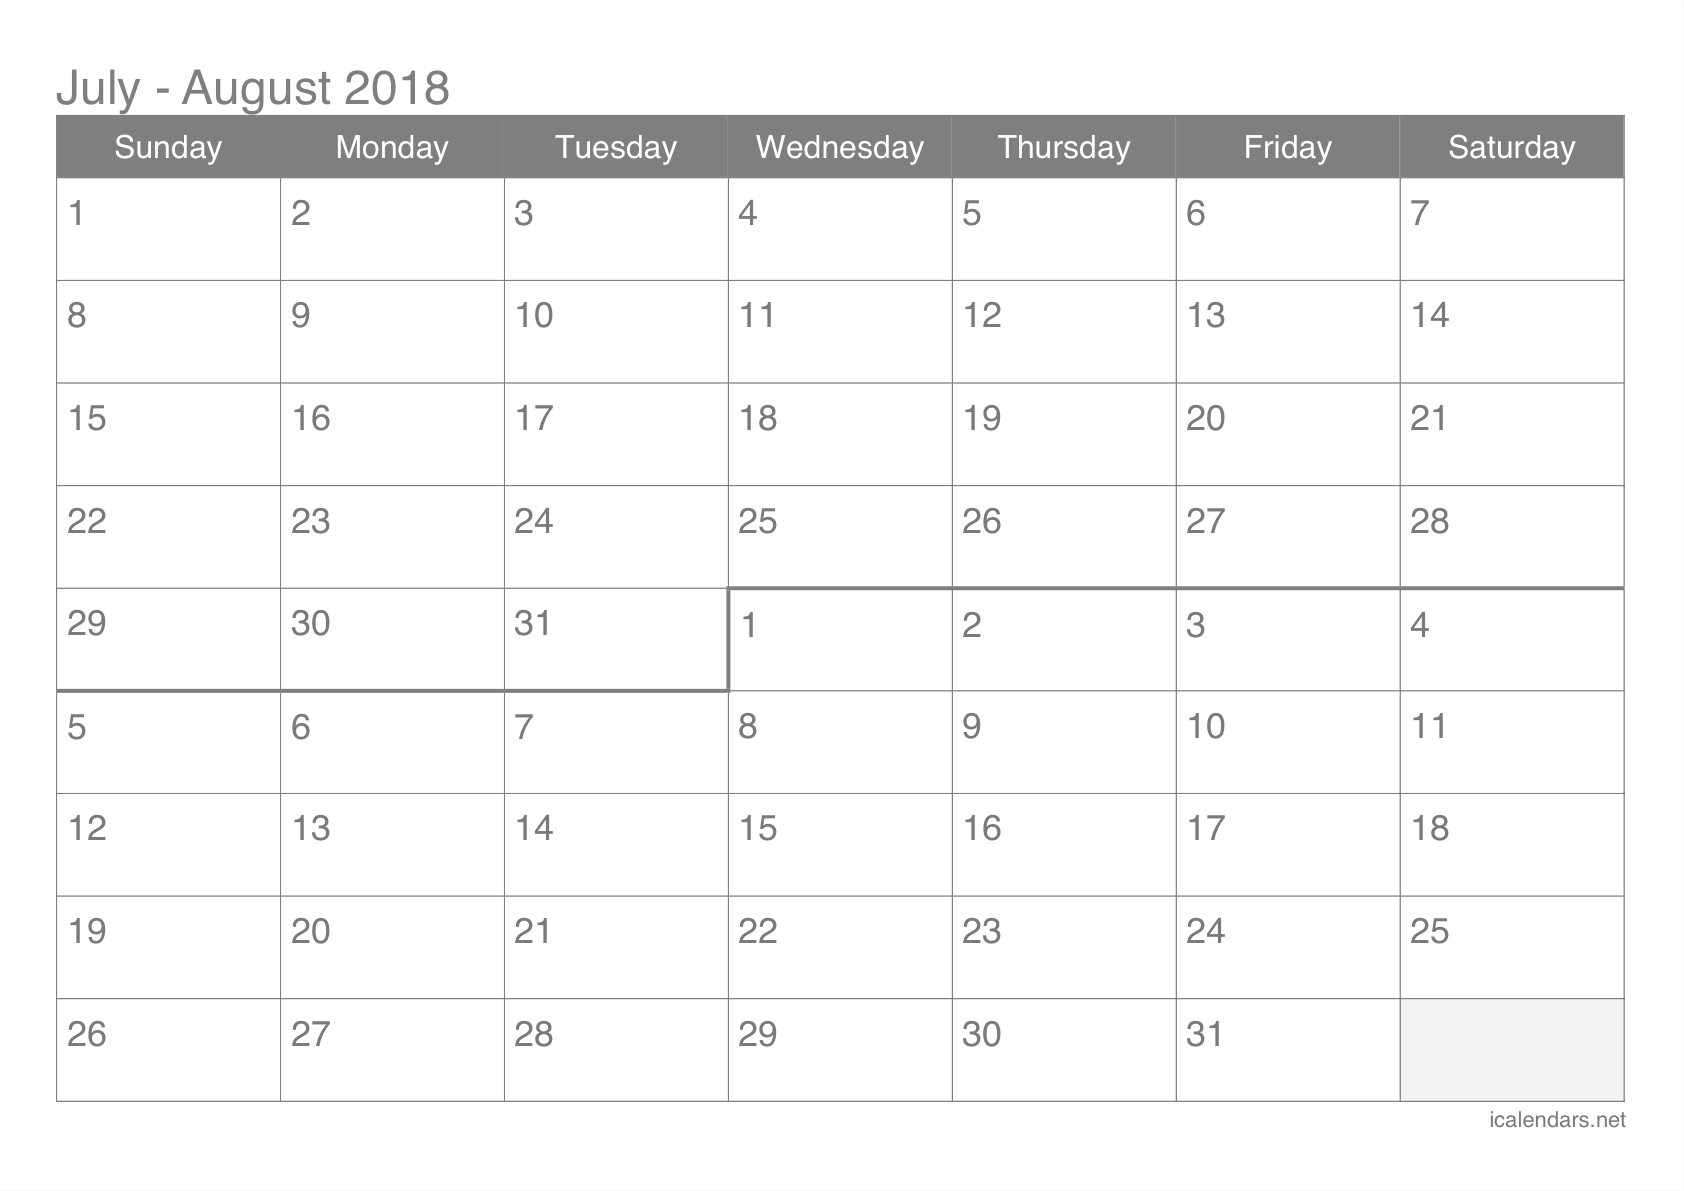 July And August 2018 Printable Calendar - Icalendars within June And July Printable Calendars